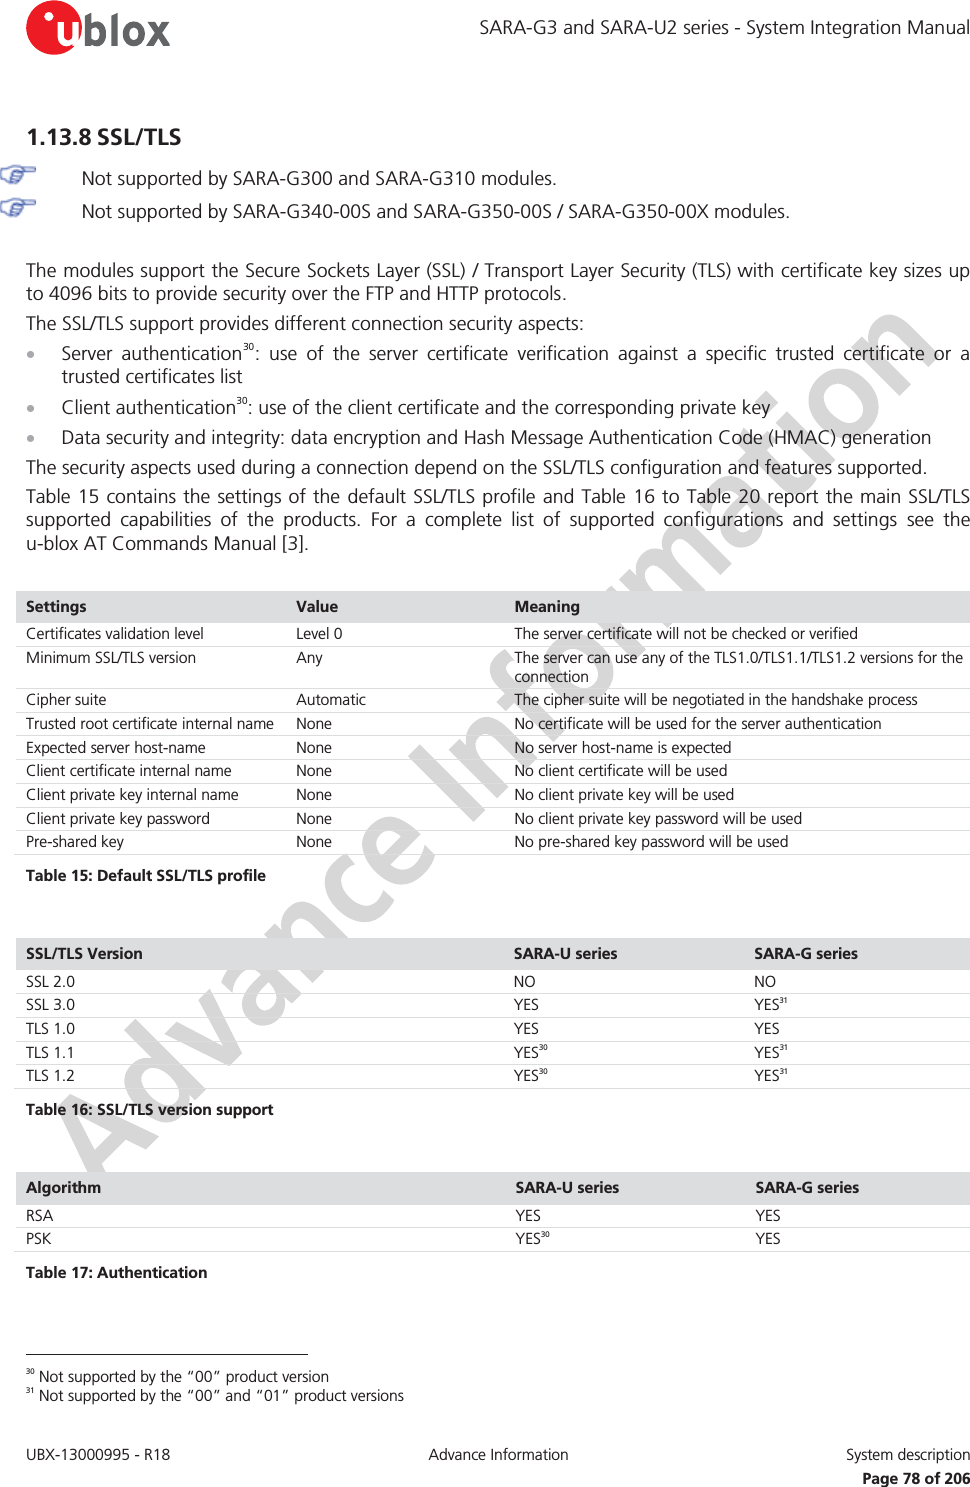 SARA-G3 and SARA-U2 series - System Integration Manual UBX-13000995 - R18  Advance Information  System description   Page 78 of 206 1.13.8 SSL/TLS  Not supported by SARA-G300 and SARA-G310 modules.  Not supported by SARA-G340-00S and SARA-G350-00S / SARA-G350-00X modules.  The modules support the Secure Sockets Layer (SSL) / Transport Layer Security (TLS) with certificate key sizes up to 4096 bits to provide security over the FTP and HTTP protocols. The SSL/TLS support provides different connection security aspects: x Server authentication30: use of the server certificate verification against a specific trusted certificate or a trusted certificates list x Client authentication30: use of the client certificate and the corresponding private key x Data security and integrity: data encryption and Hash Message Authentication Code (HMAC) generation The security aspects used during a connection depend on the SSL/TLS configuration and features supported.  Table 15 contains the settings of the default SSL/TLS profile and Table 16 to Table 20 report the main SSL/TLS supported capabilities of the products. For a complete list of supported configurations and settings see the u-blox AT Commands Manual [3].  Settings  Value   Meaning Certificates validation level Level 0 The server certificate will not be checked or verified Minimum SSL/TLS version Any The server can use any of the TLS1.0/TLS1.1/TLS1.2 versions for the connection Cipher suite Automatic The cipher suite will be negotiated in the handshake process Trusted root certificate internal name None No certificate will be used for the server authentication Expected server host-name None No server host-name is expected Client certificate internal name None No client certificate will be used Client private key internal name None No client private key will be used Client private key password None No client private key password will be used Pre-shared key None No pre-shared key password will be used Table 15: Default SSL/TLS profile  SSL/TLS Version  SARA-U series  SARA-G series SSL 2.0 NO NO SSL 3.0 YES YES31 TLS 1.0 YES YES TLS 1.1 YES30 YES31 TLS 1.2 YES30 YES31 Table 16: SSL/TLS version support  Algorithm  SARA-U series  SARA-G series RSA YES YES PSK YES30 YES Table 17: Authentication                                                        30 Not supported by the “00” product version 31 Not supported by the “00” and “01” product versions 